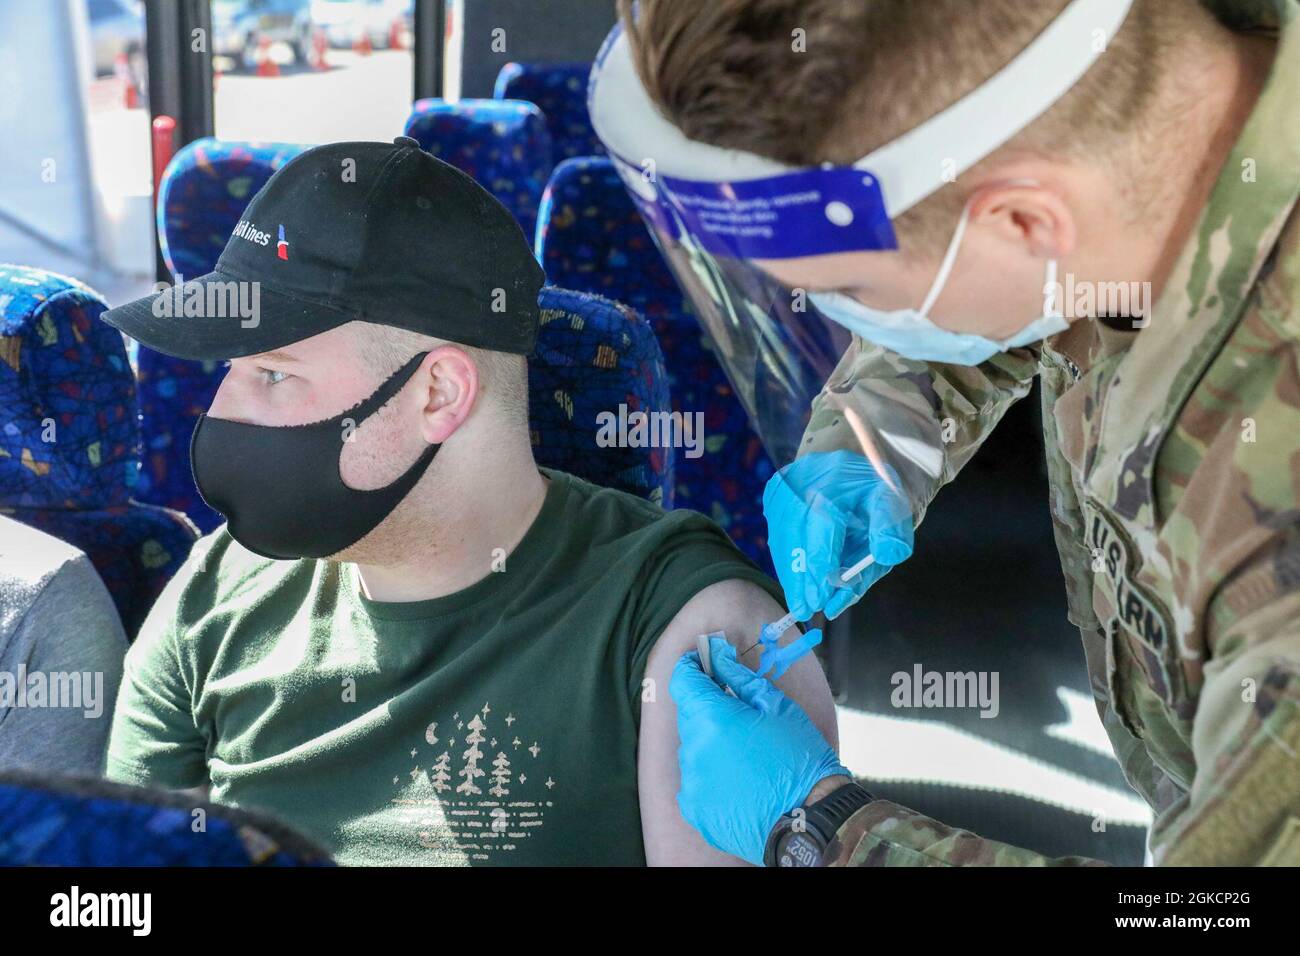 U.S. Army Spc. Joshua Thompson, a combat medic with 82nd Brigade Engineer Battalion, 2nd Armored Brigade Combat Team, 1st Infantry Division, administers a COVID-19 vaccination to Lucas Vines, a Euless, Texas, community member, at the Fair Park Community Vaccination Center (CVC) in Dallas, March 15, 2021. 1st Infantry Division Soldiers were deployed to Dallas from Fort Riley, Kansas, and vaccinated local community members that were transported to the CVC by the Federal Emergency Management Agency (FEMA) from underserved Dallas areas. U.S. Northern Command, through U.S. Army North, remains commi Stock Photo